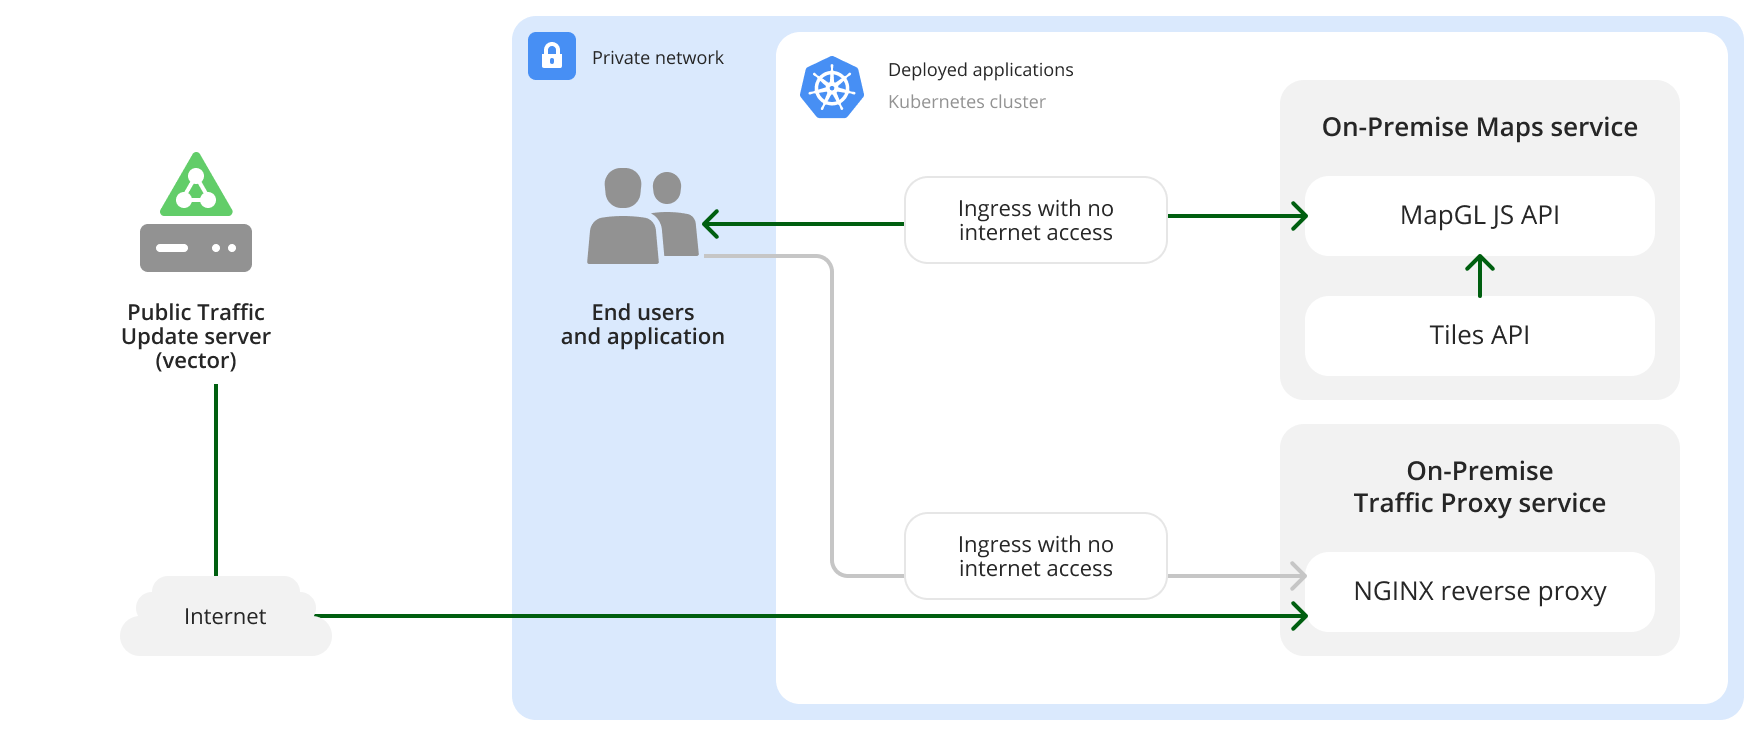 Example internet access diagram for On-Premise Maps service